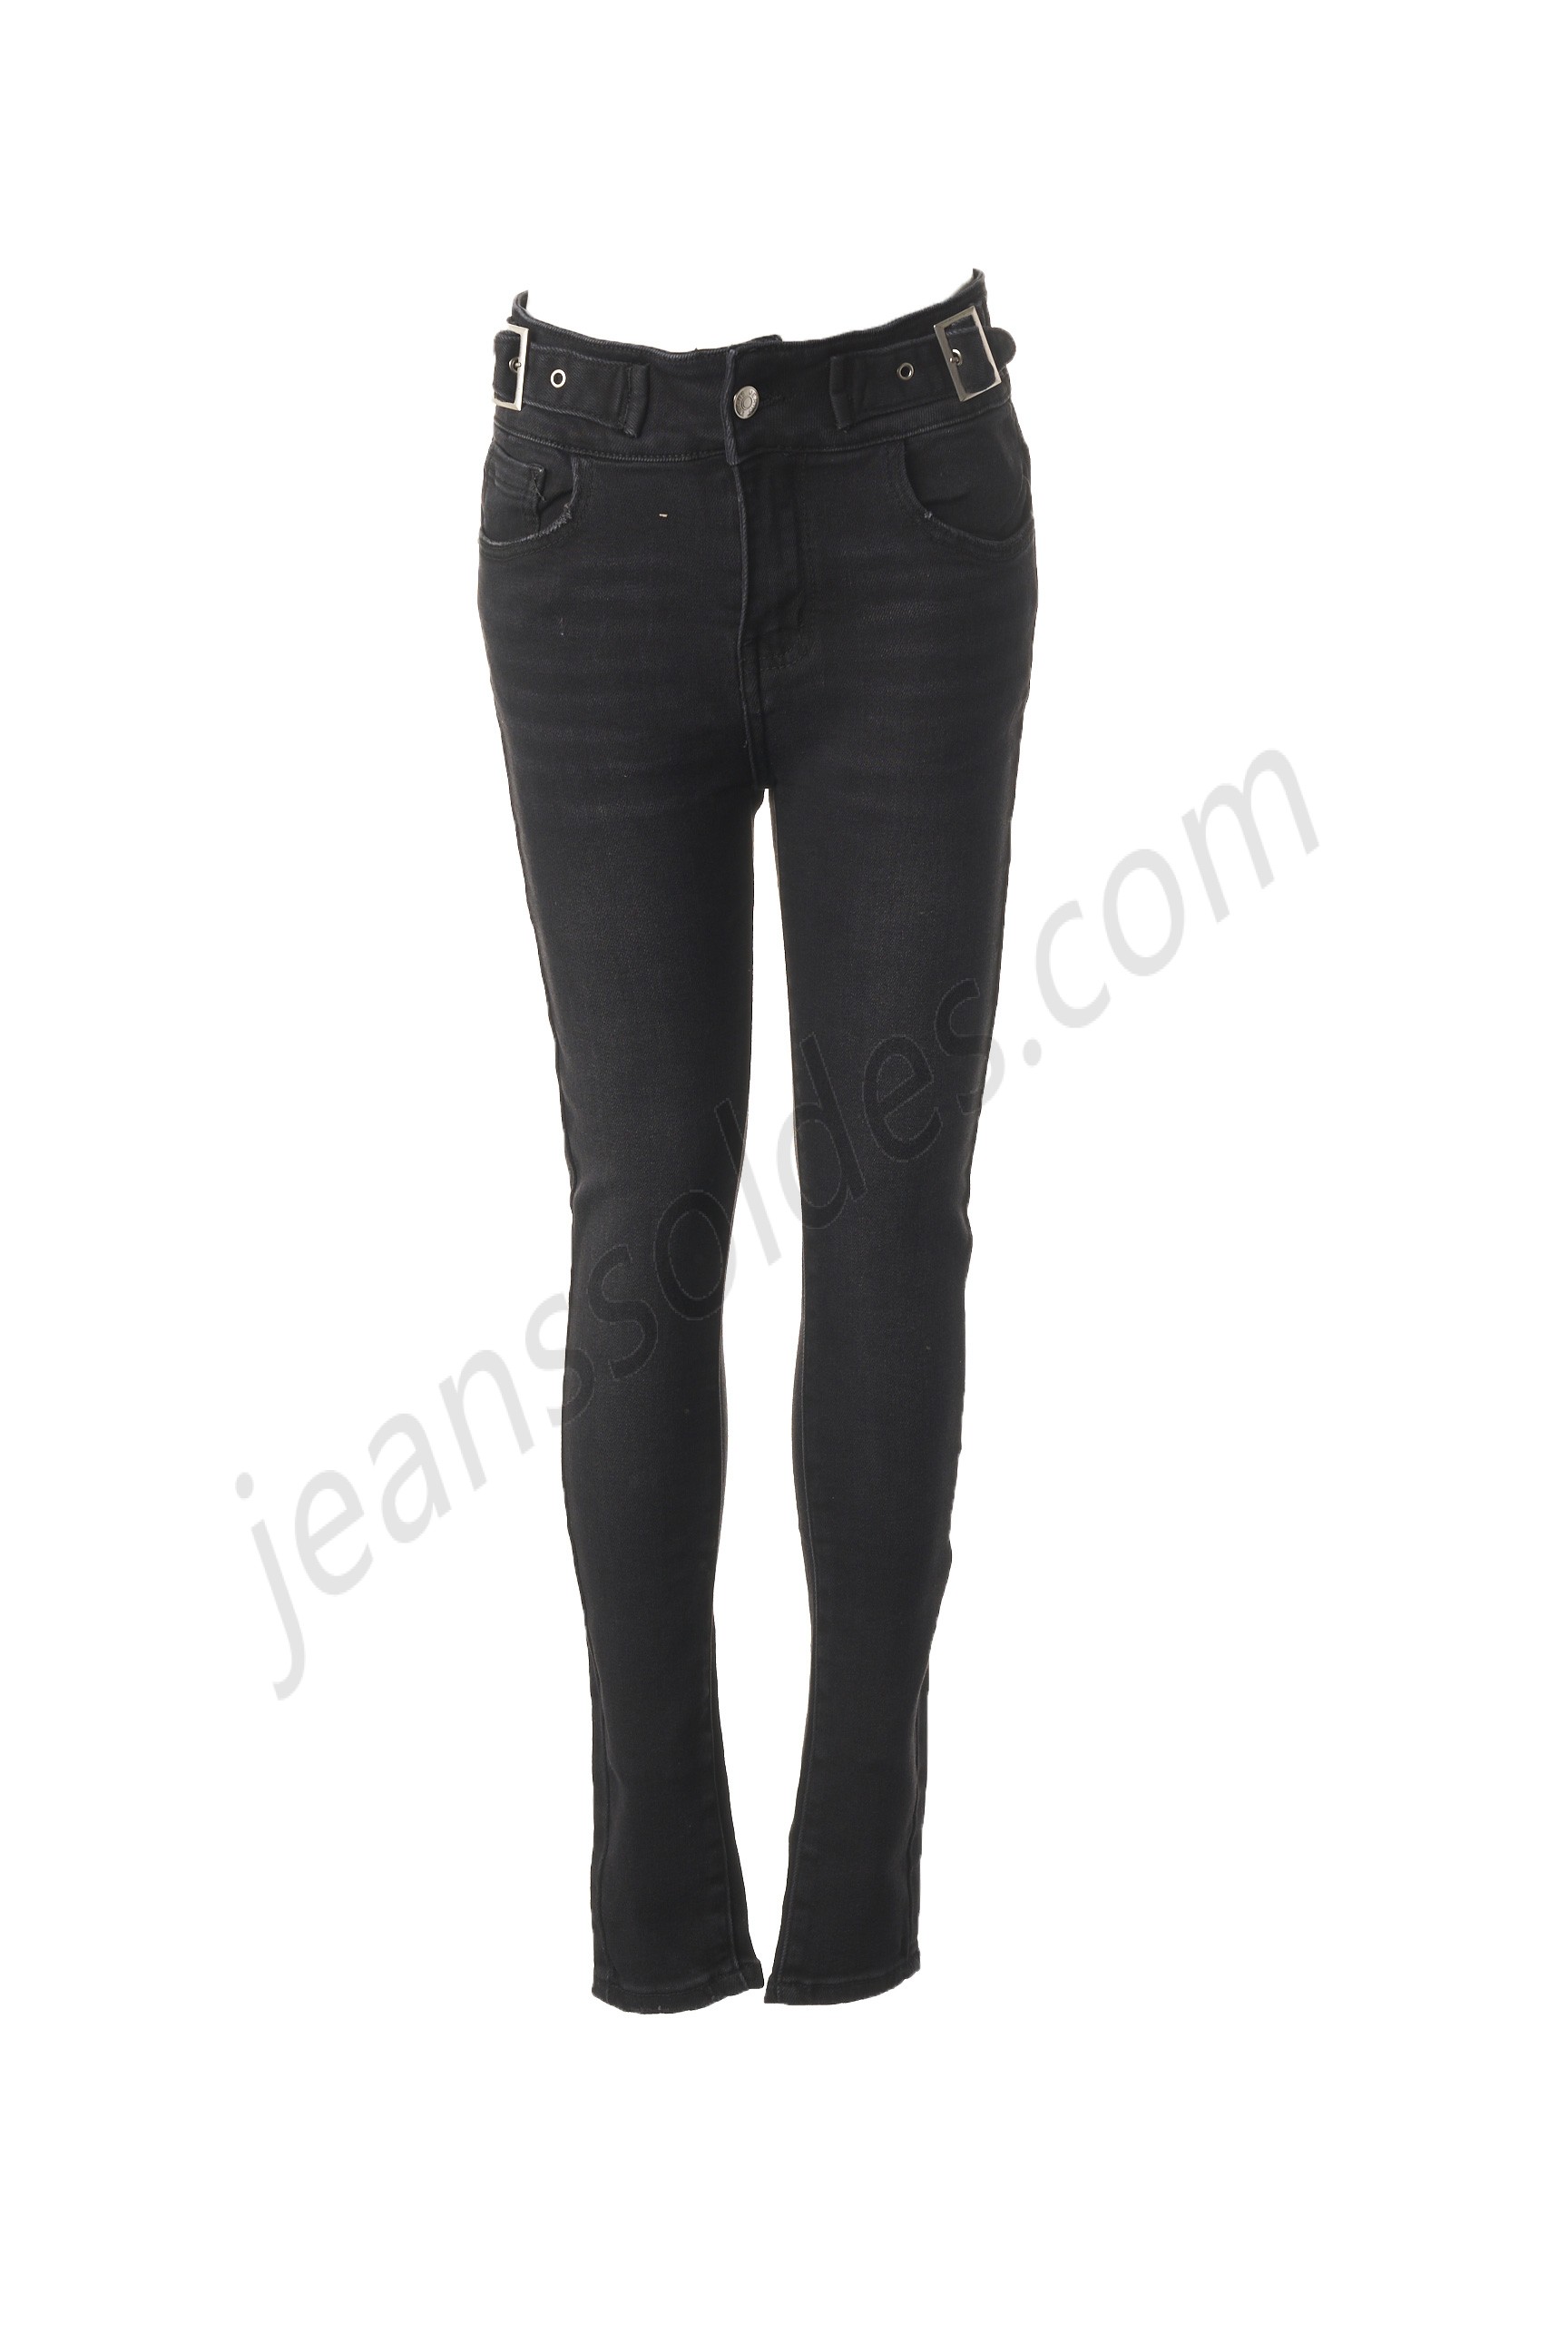 collection irl-Jeans coupe slim prix d’amis - collection irl-Jeans coupe slim prix d’amis